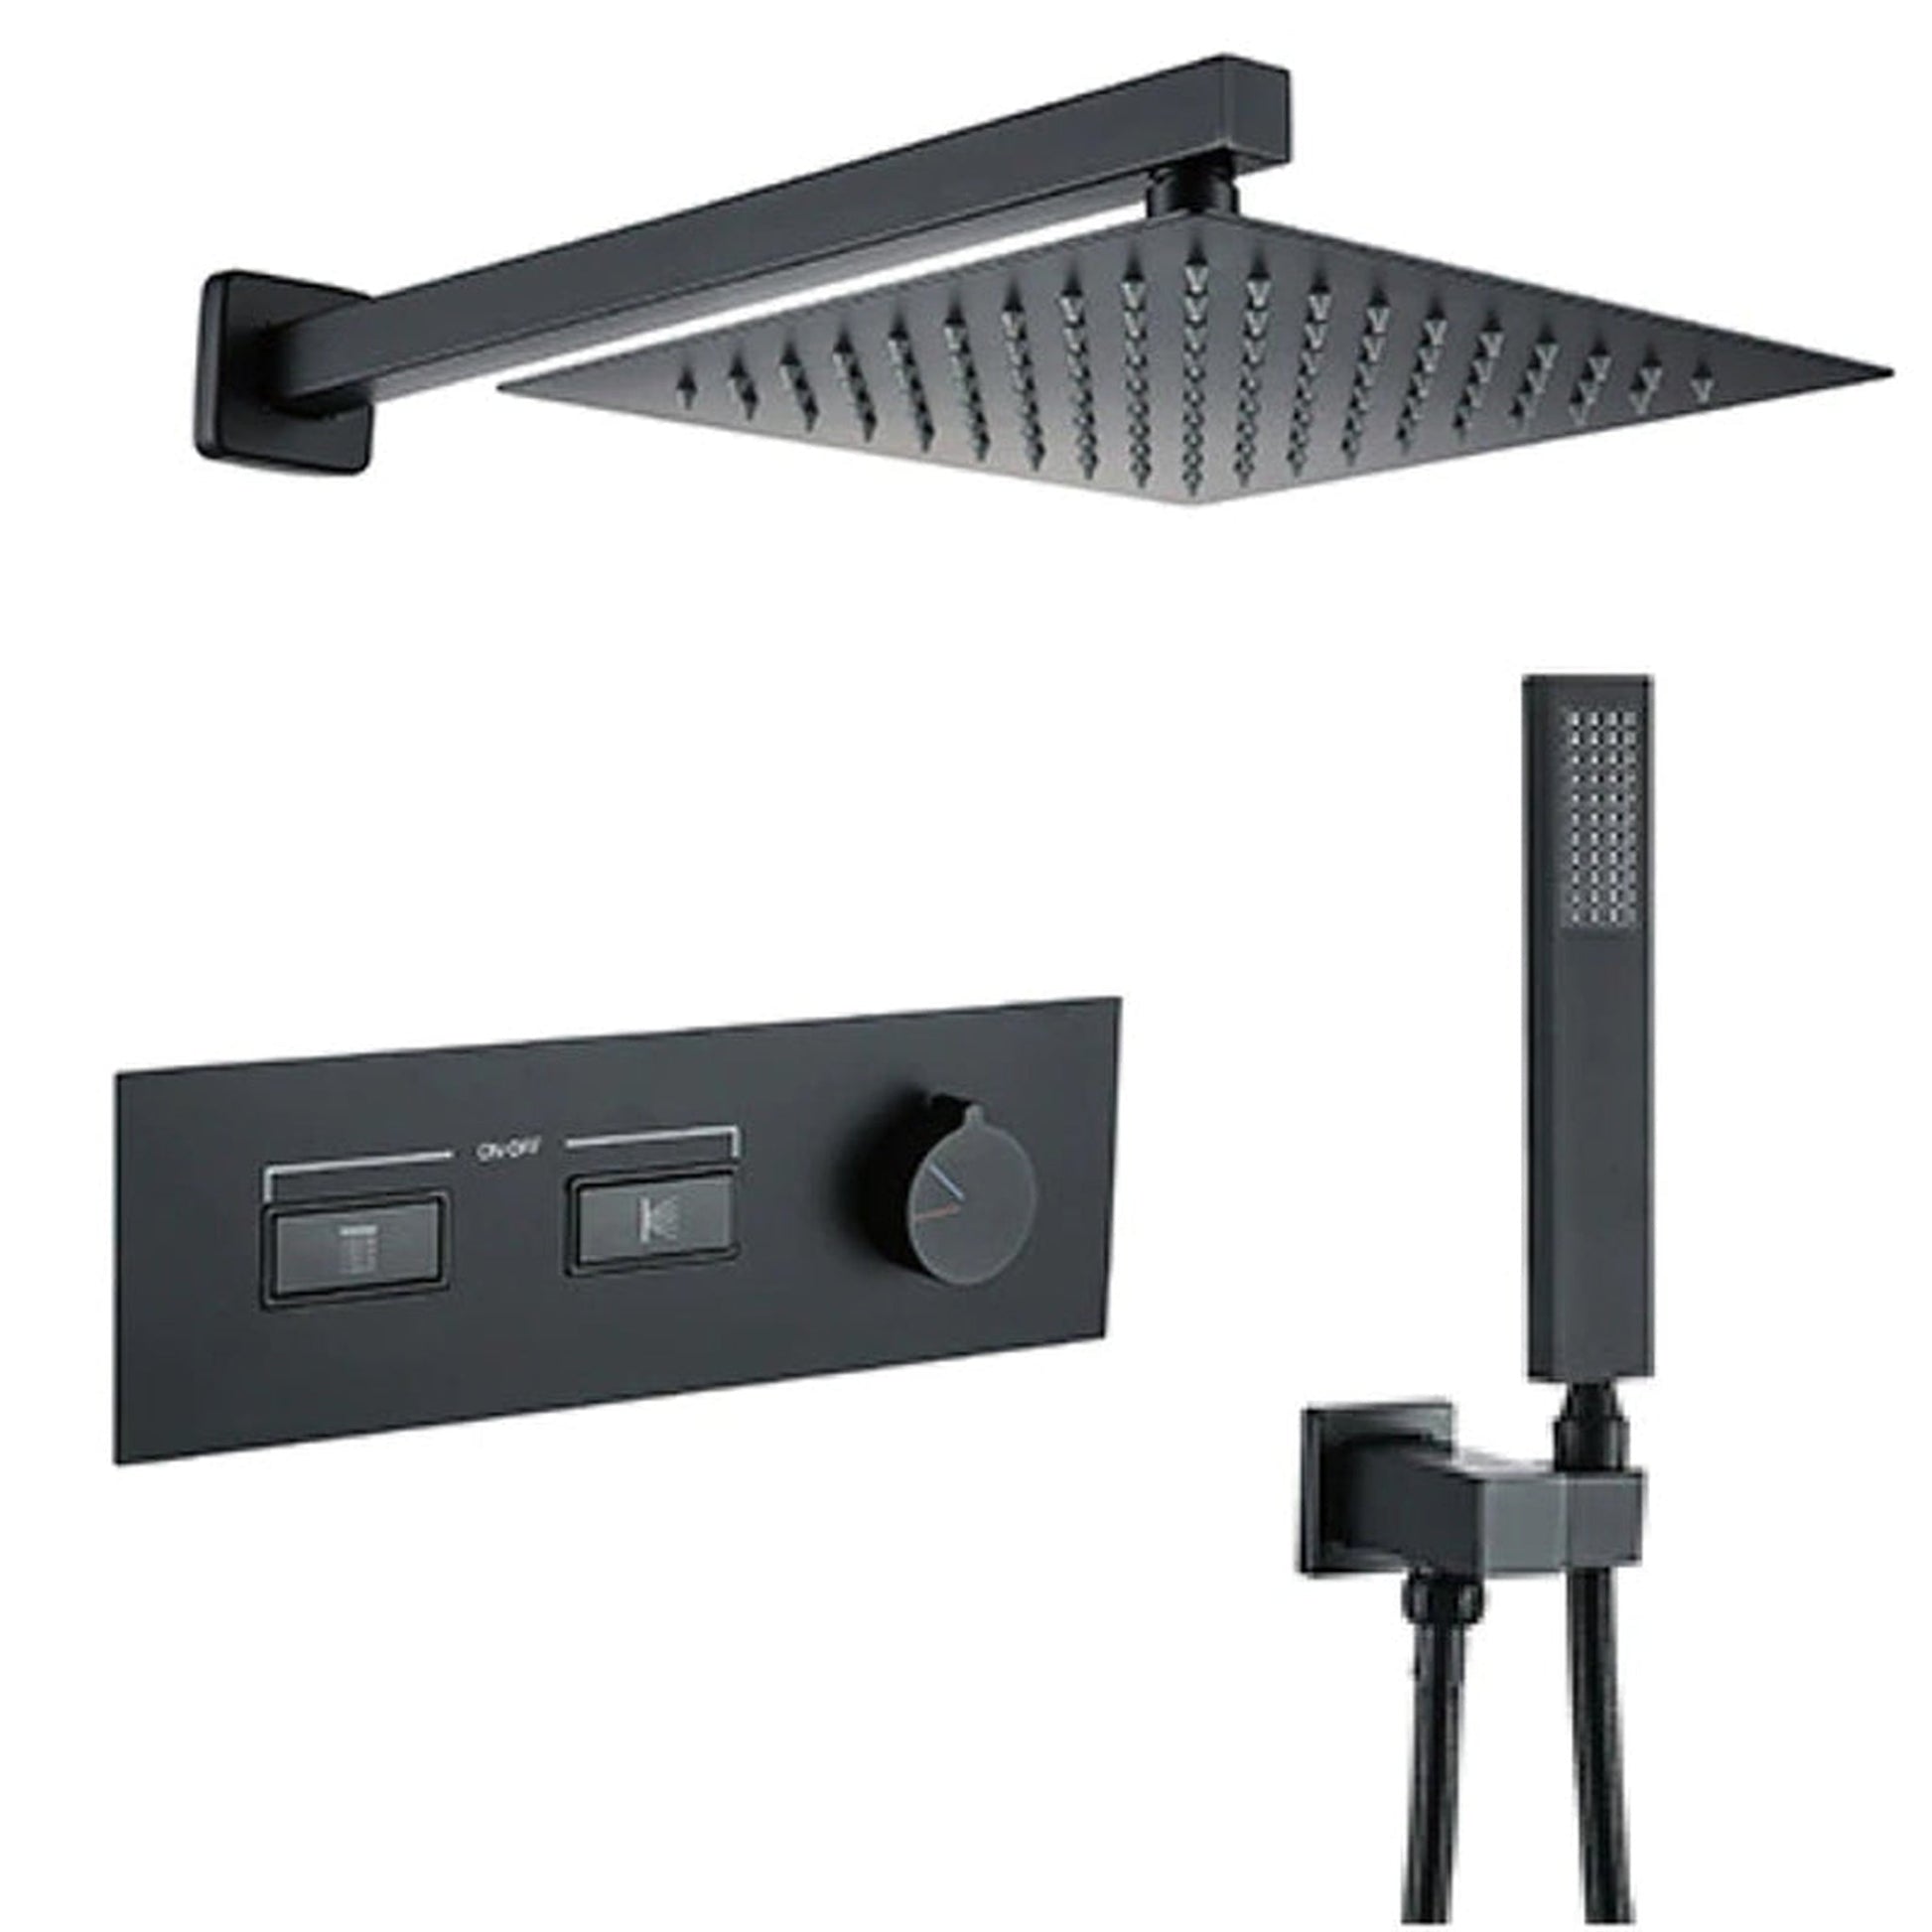 Fontana Varese Matte Black Wall-Mounted 2-Functions Thermostatic Rainfall Shower System With Hand Shower